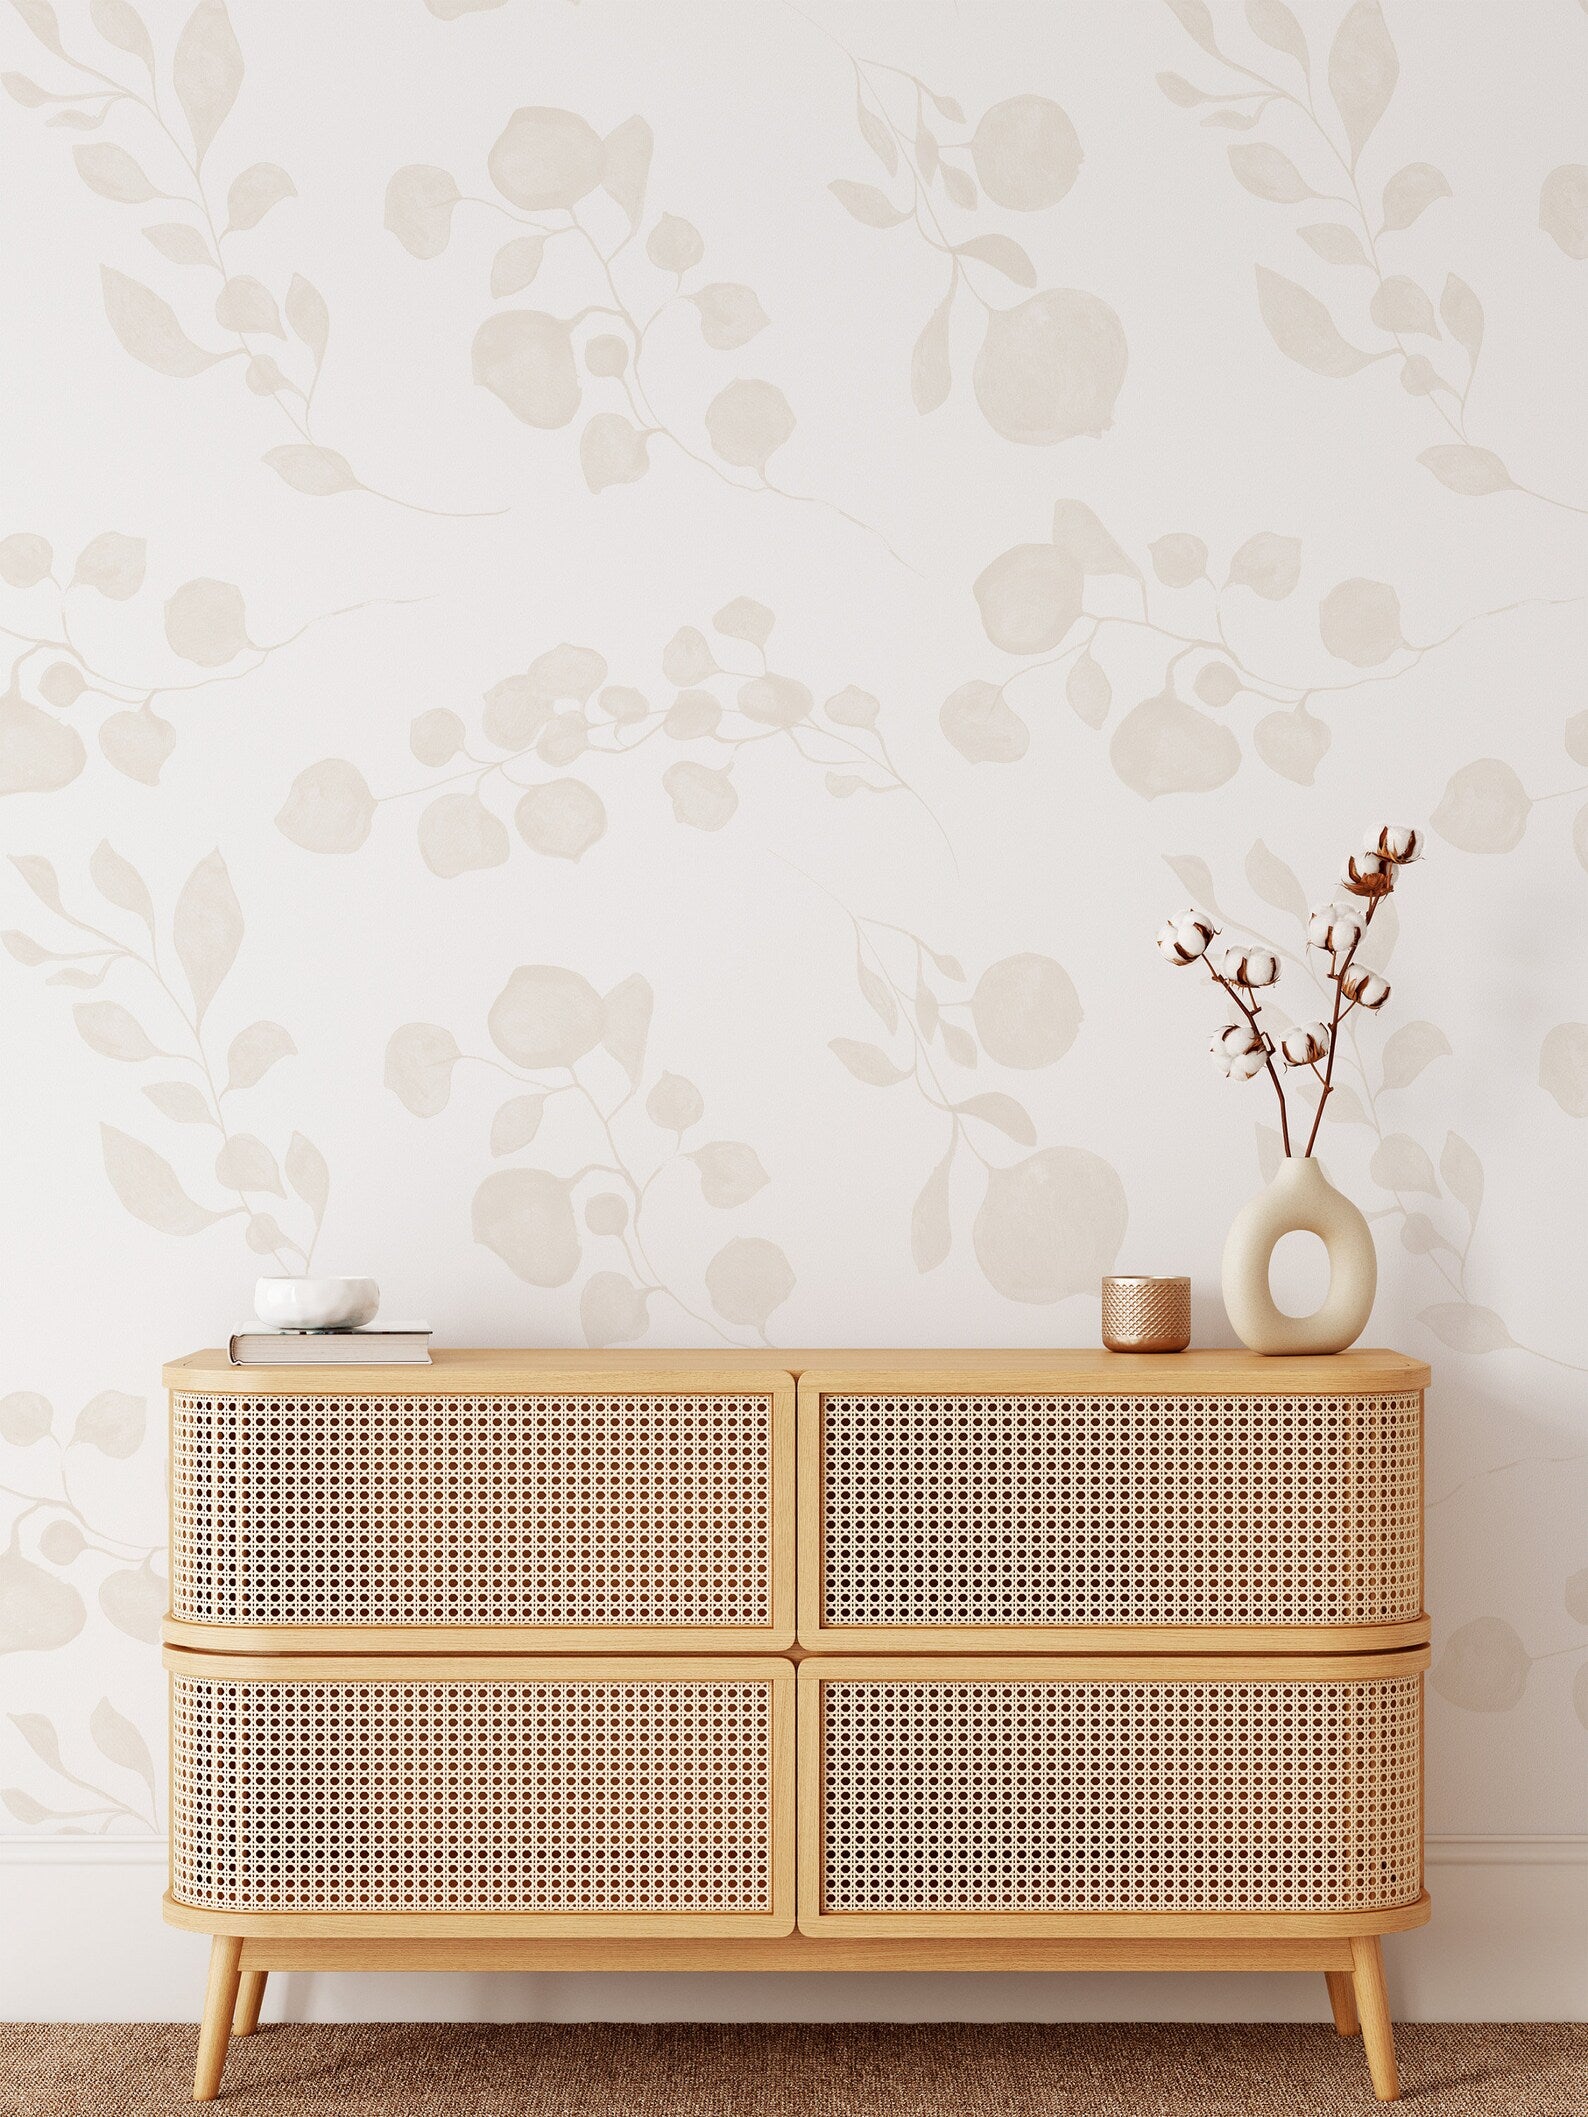 A minimalist modern room showcasing the 'Subtle Botanique Wallpaper', with soft beige botanical silhouettes complementing the clean lines of a rattan-fronted sideboard, adorned with a simple vase and books, enhancing the room's serene and chic vibe